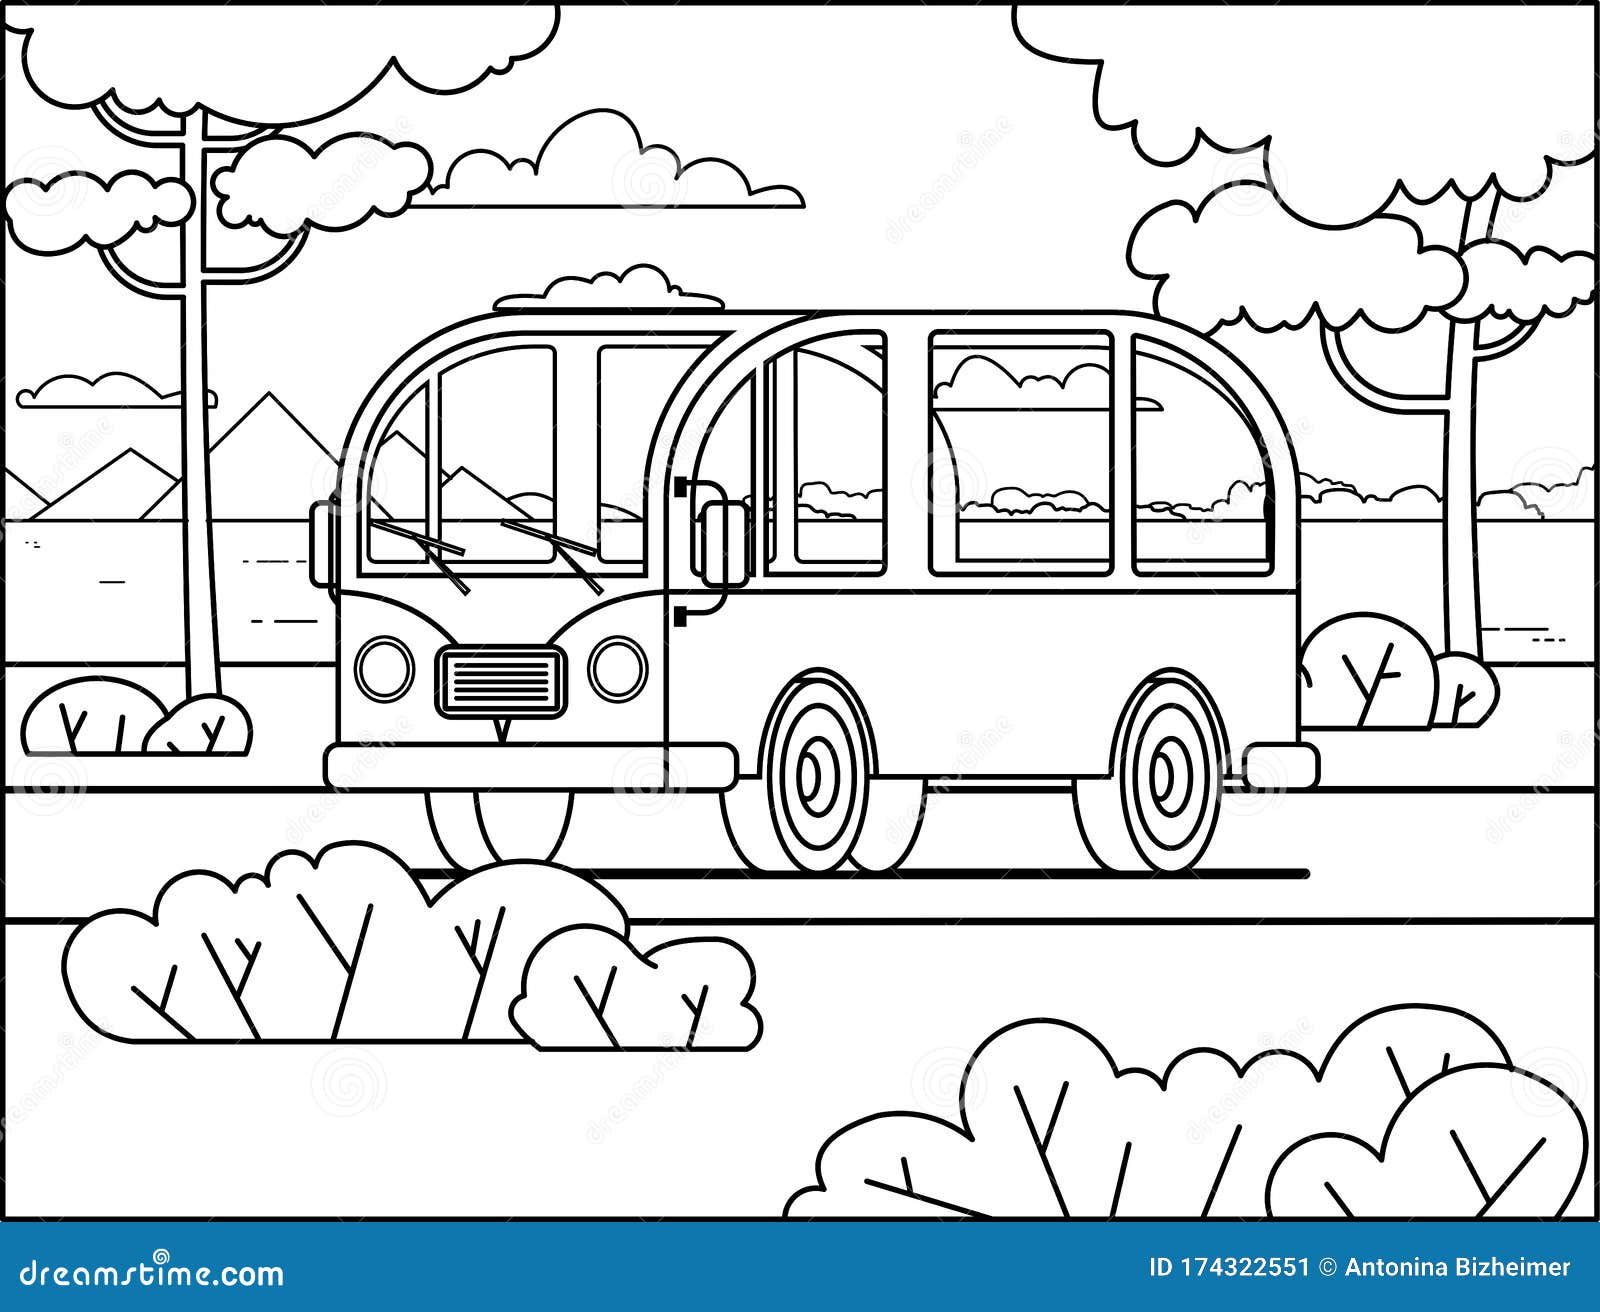 Contour Minivan For Coloring Book Page; Stylized Retro Minivan On The